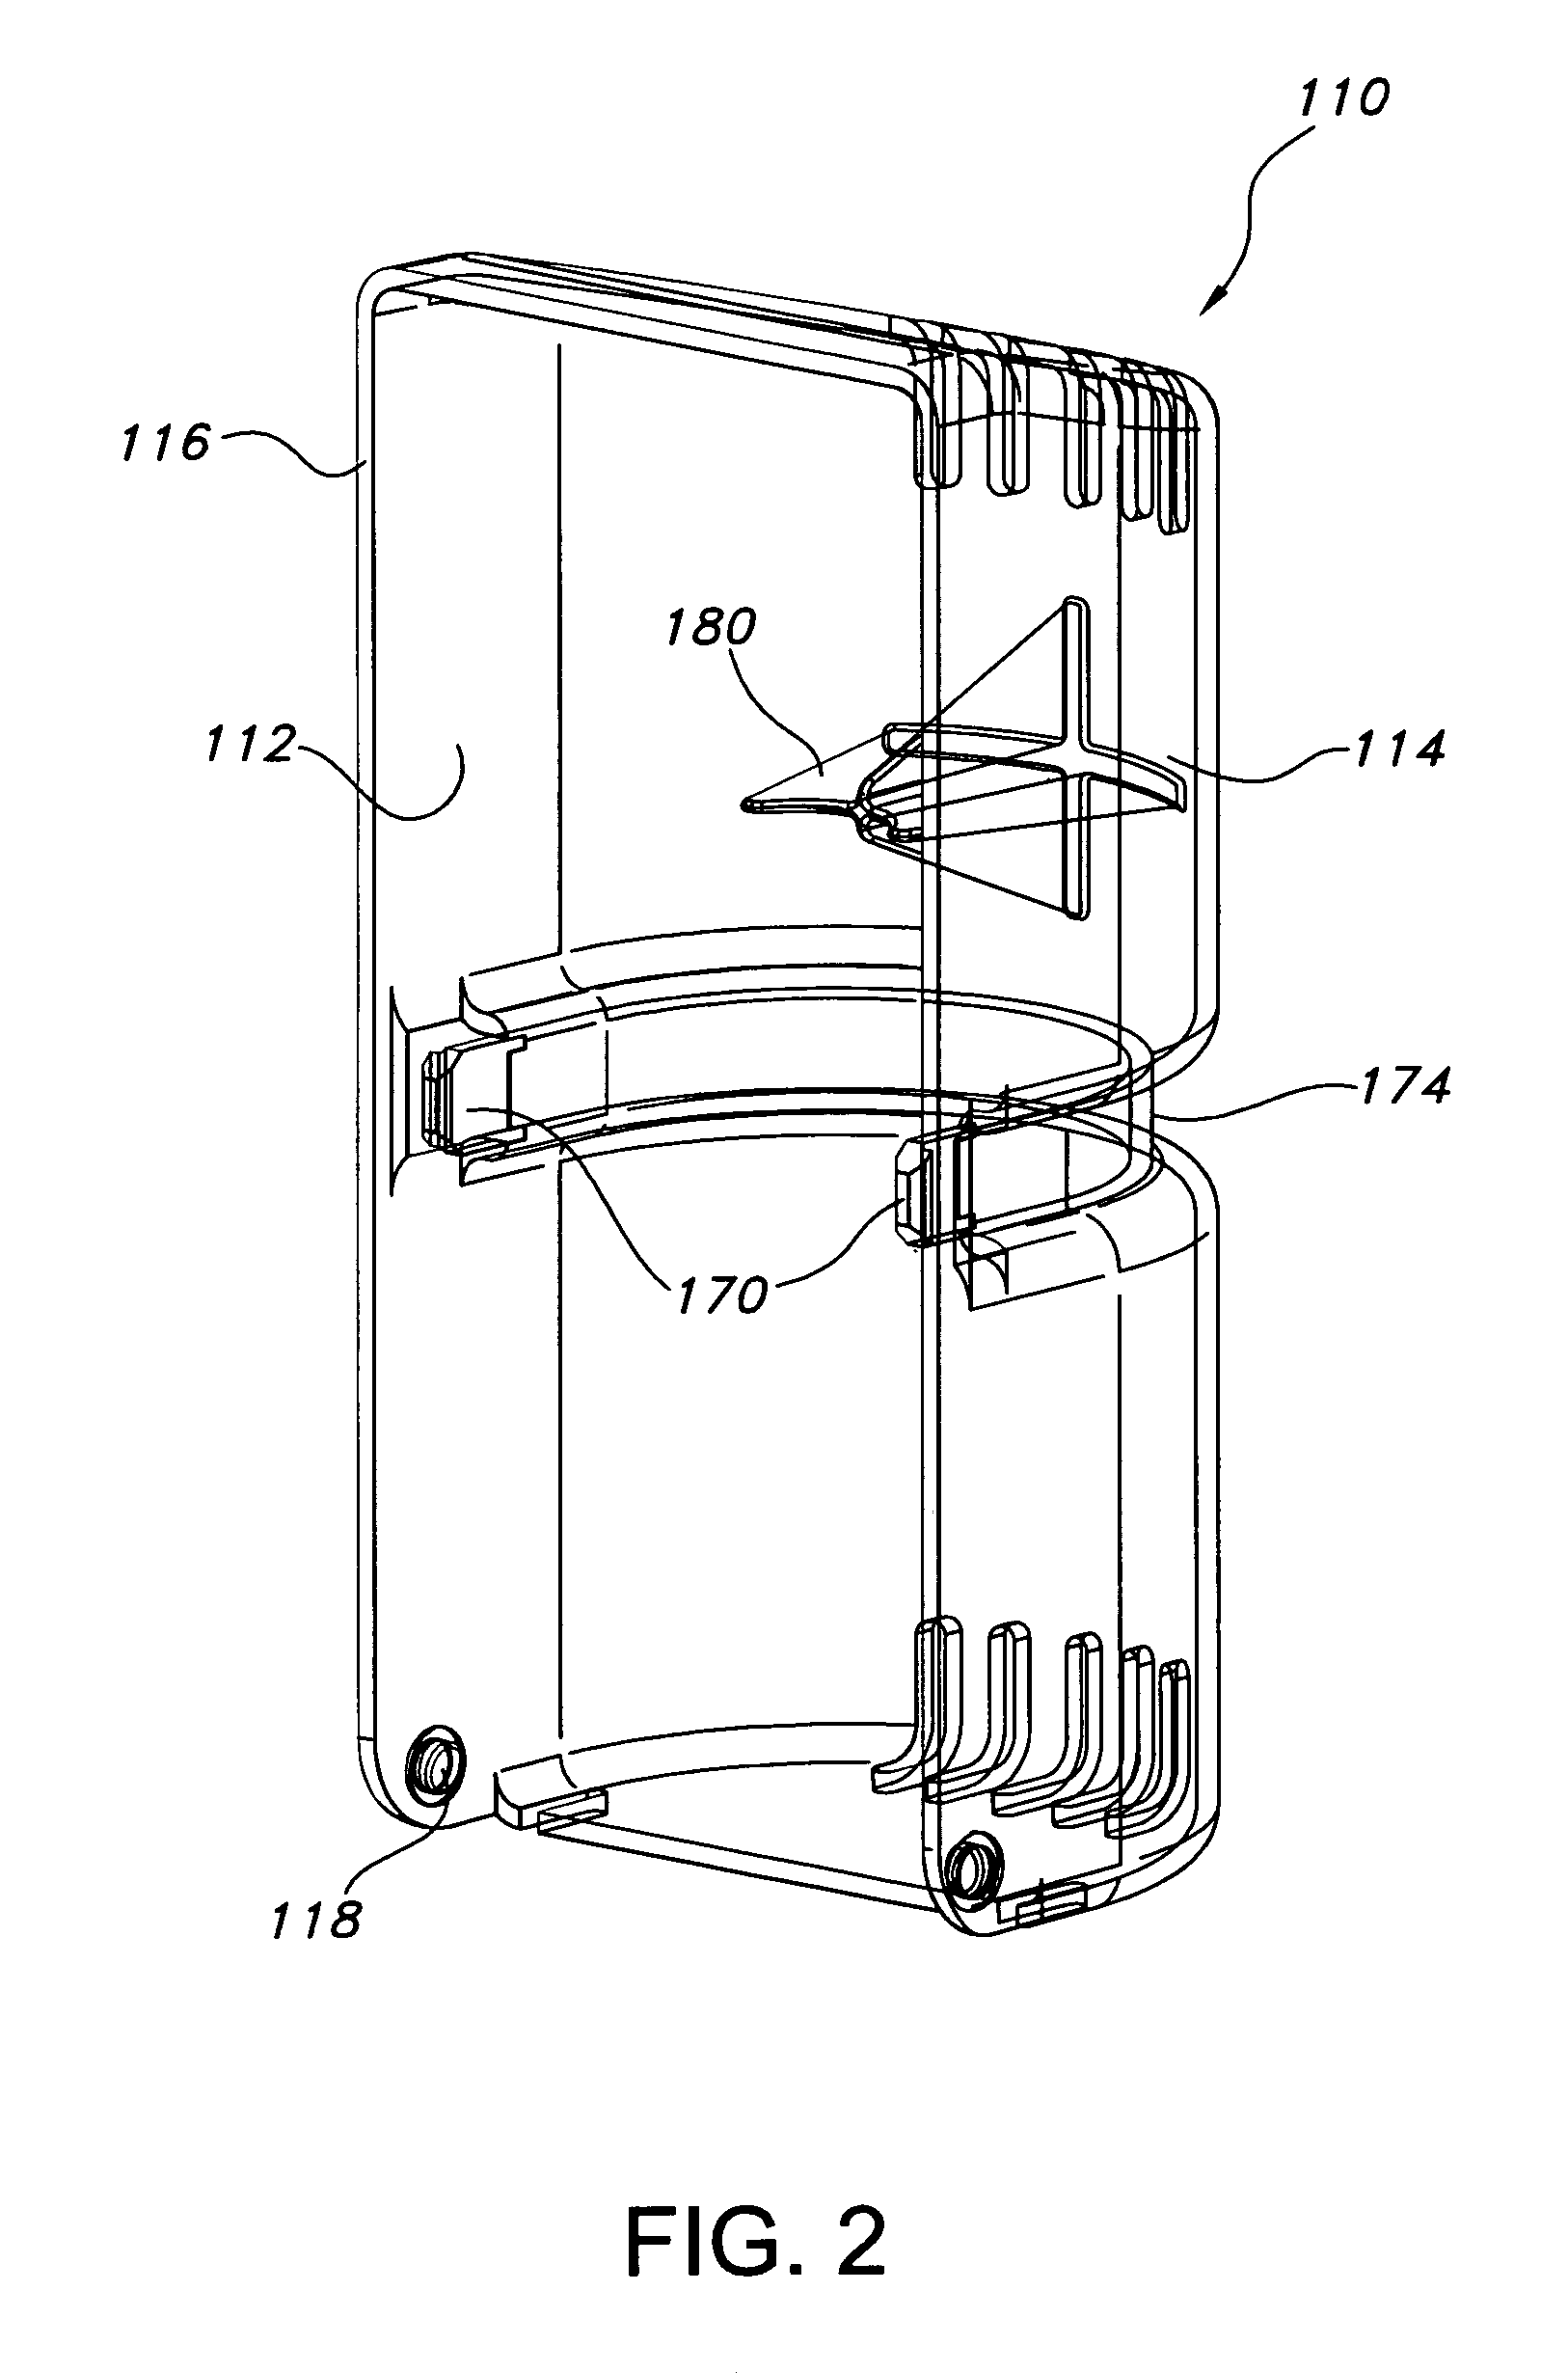 Auto-injector storage and dispensing system